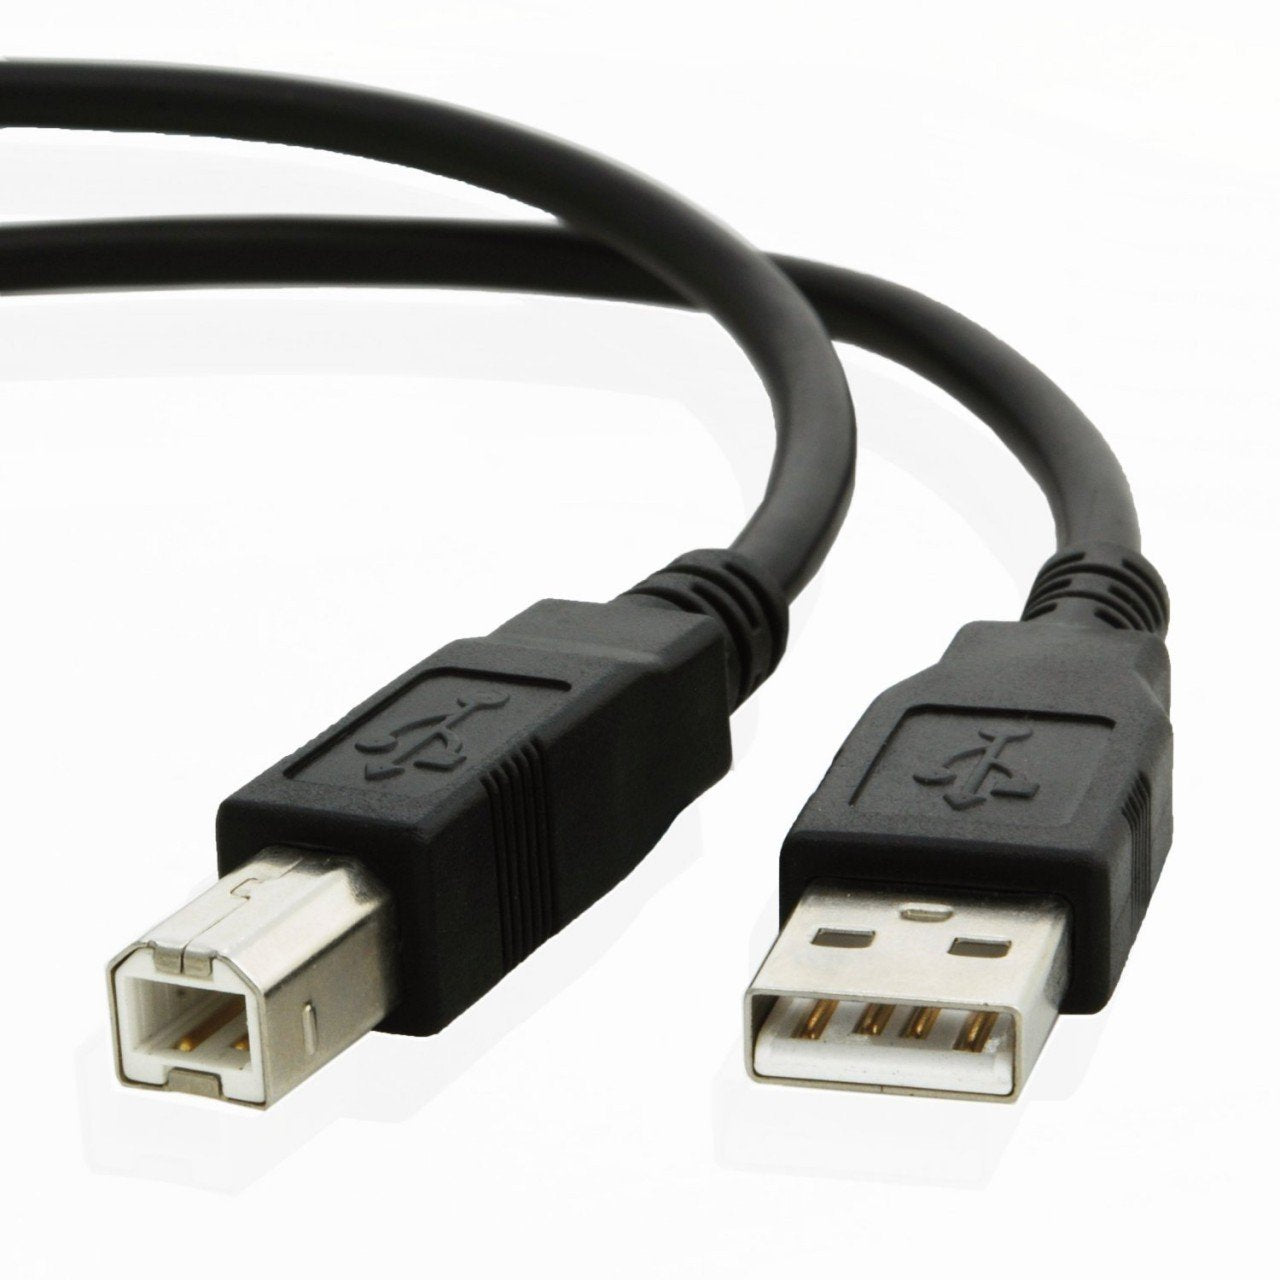 USB cable for Brother INTELLIFAX 2840